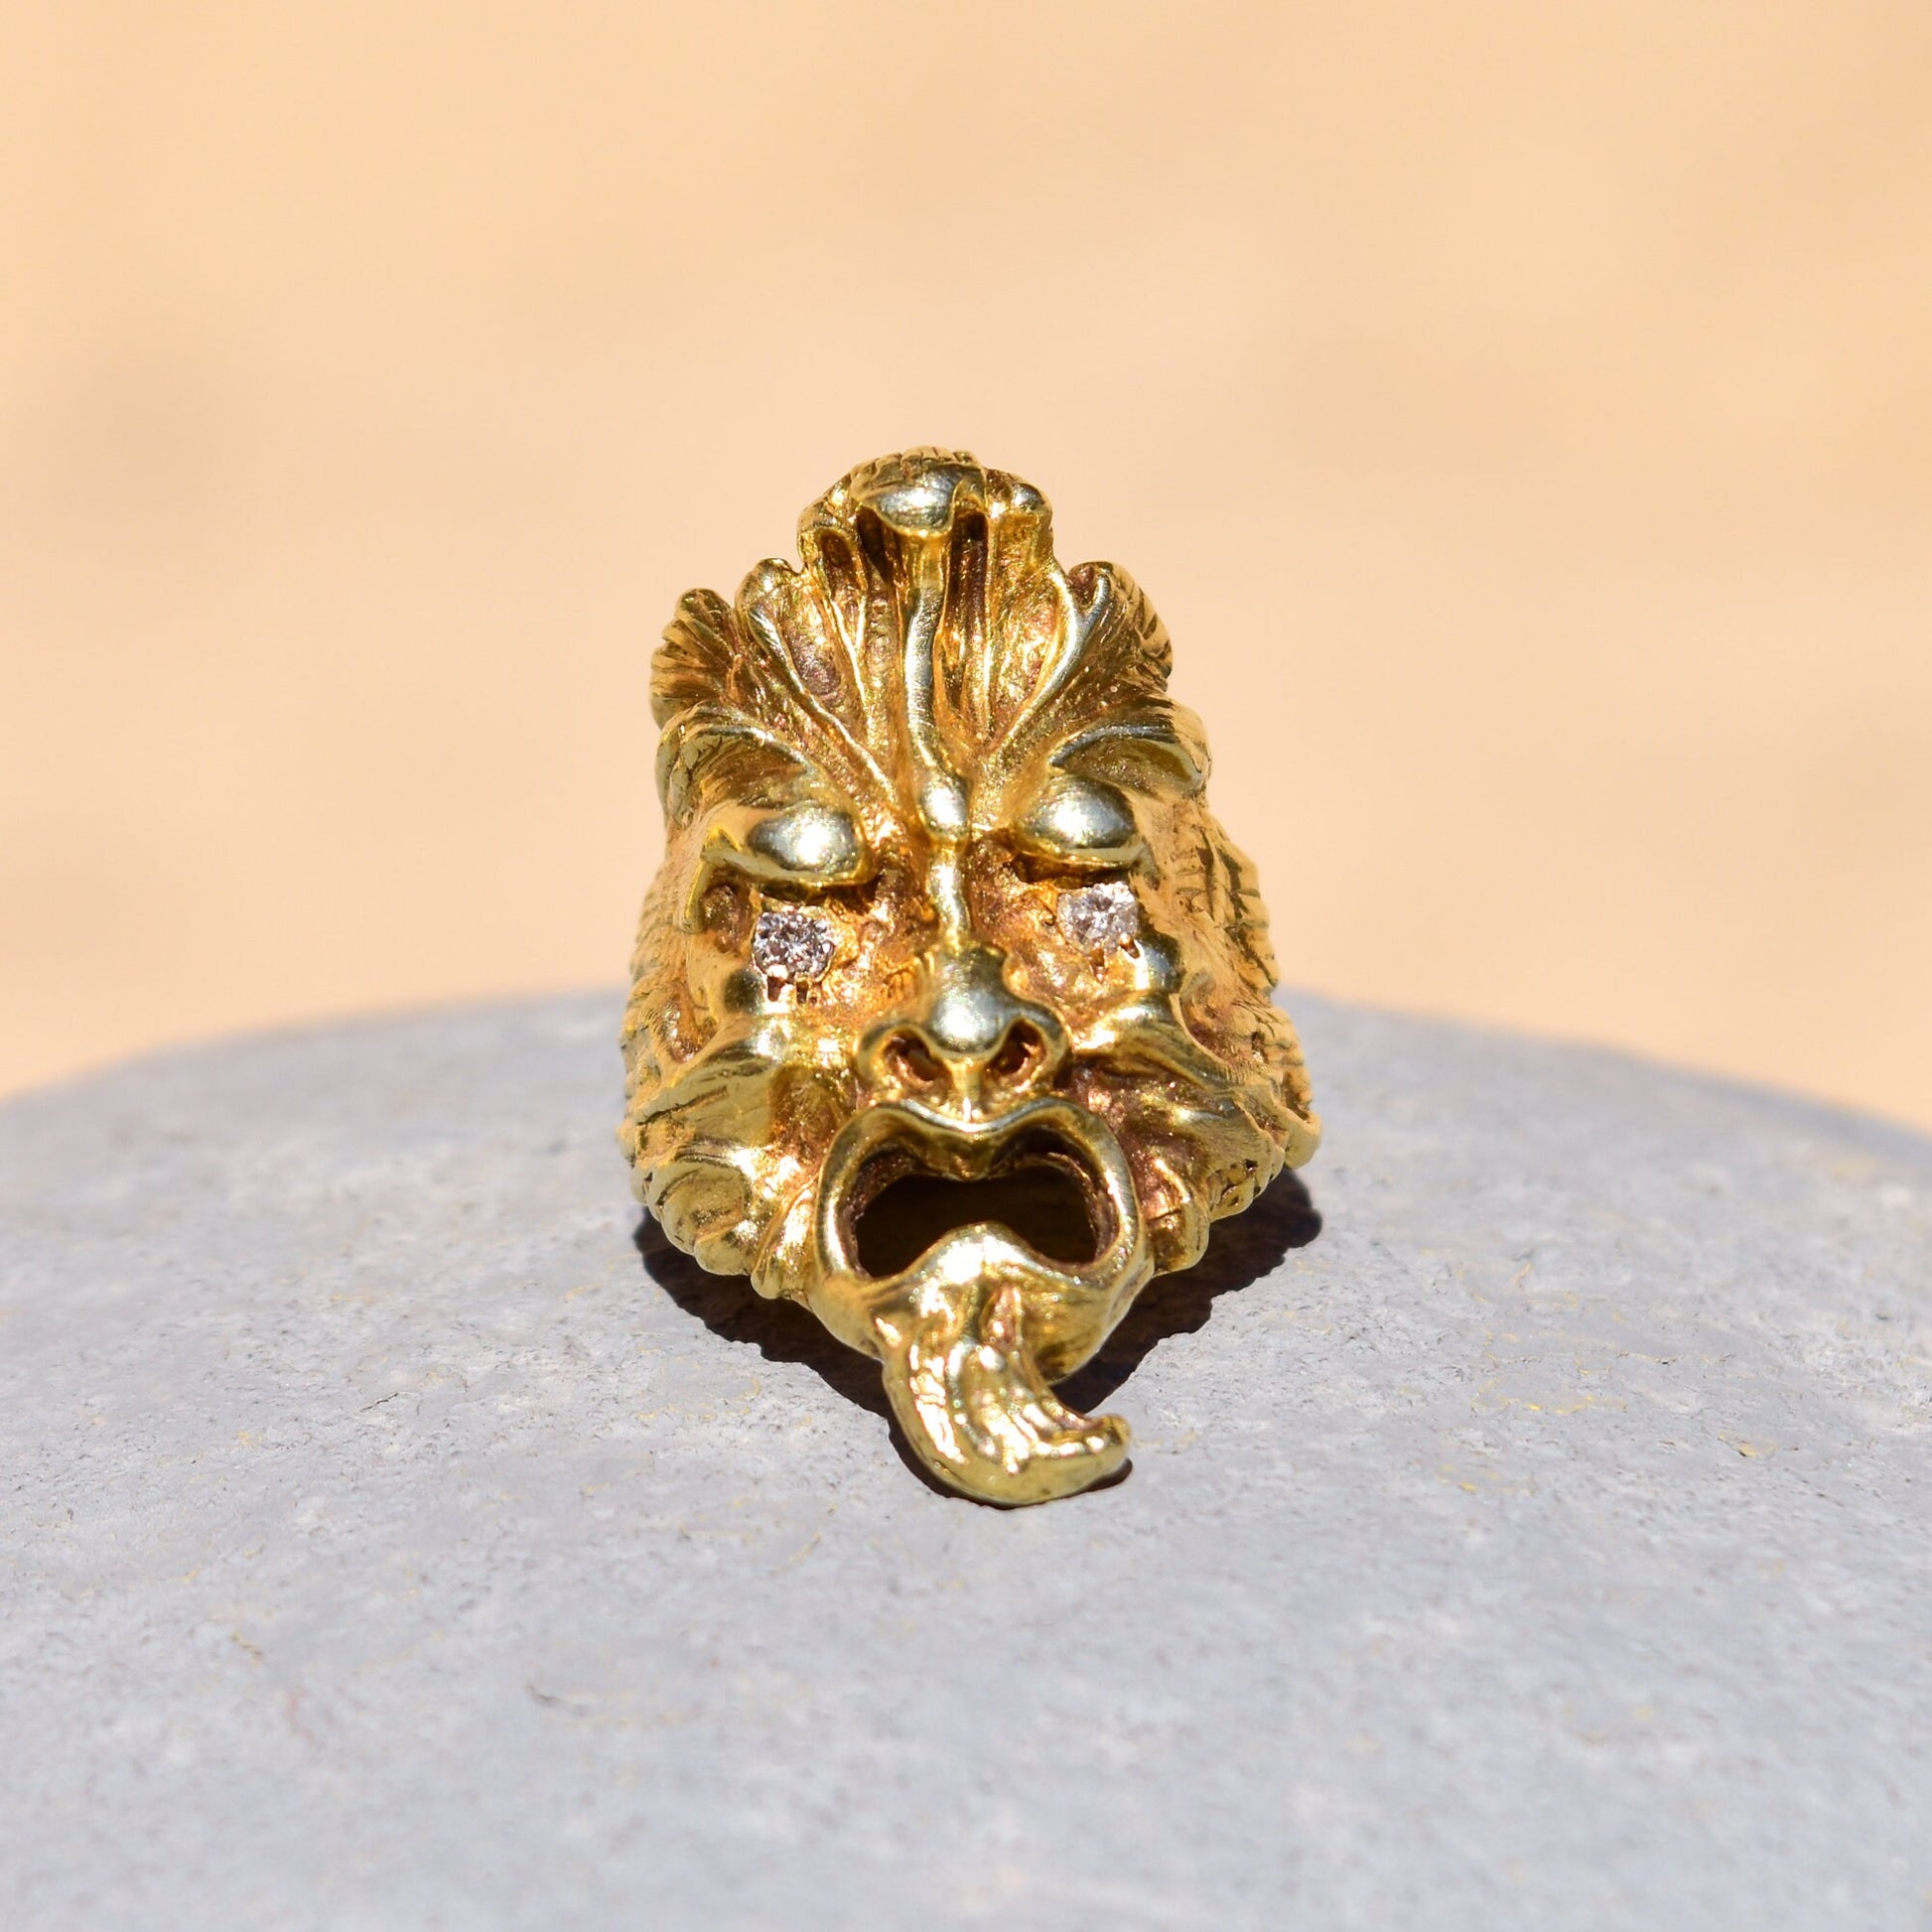 Solid 14K gold sculpted face men's ring with diamond eyes, crafted in a detailed mask design. A unique statement ring with .20 total carat weight diamonds, size 9 US.